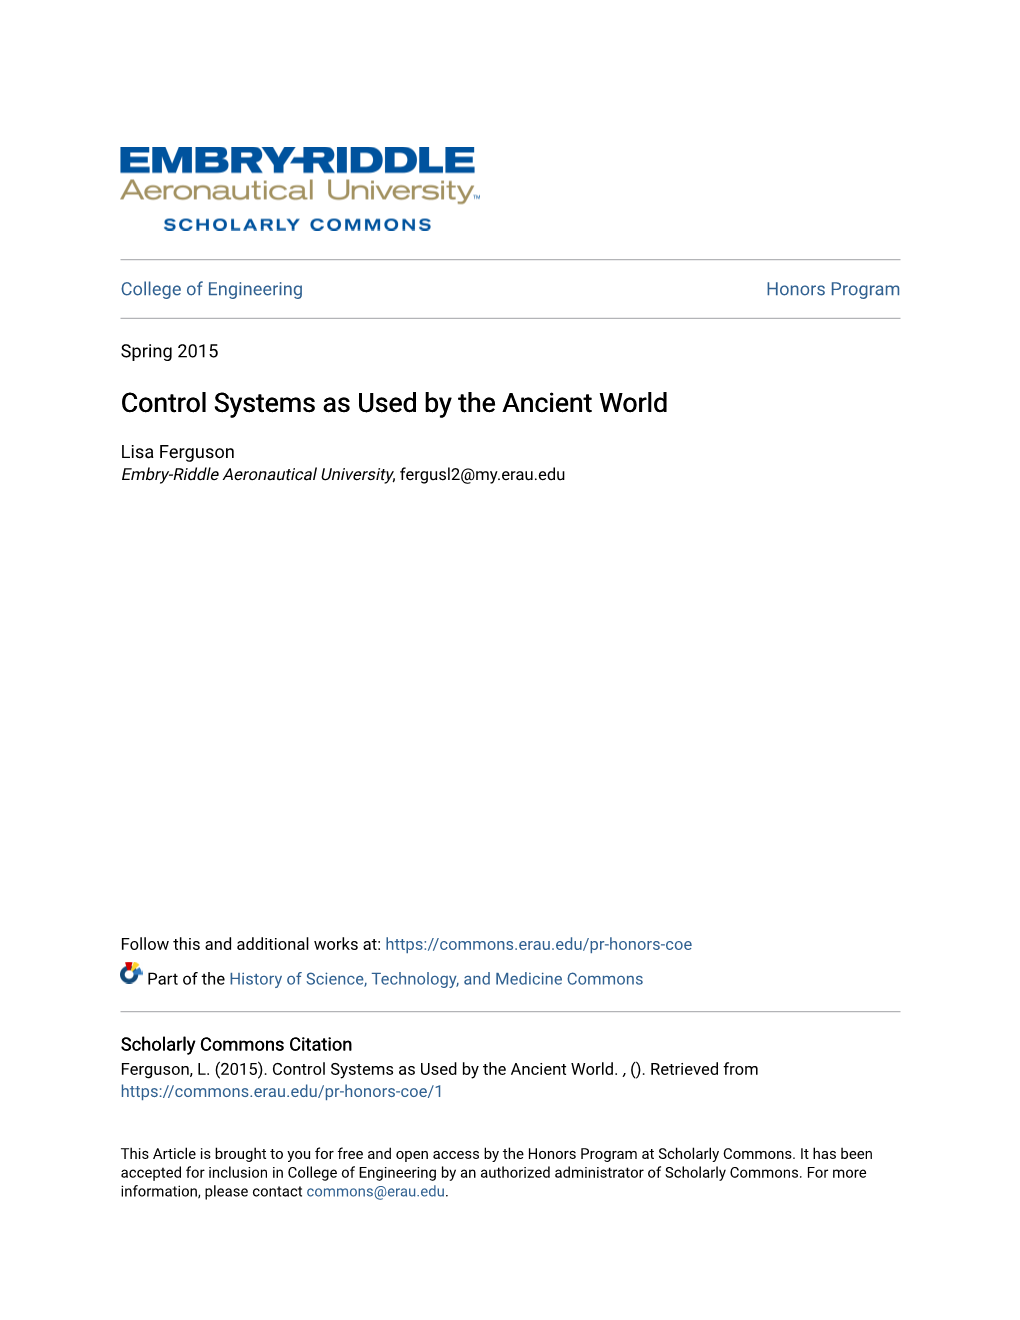 Control Systems As Used by the Ancient World